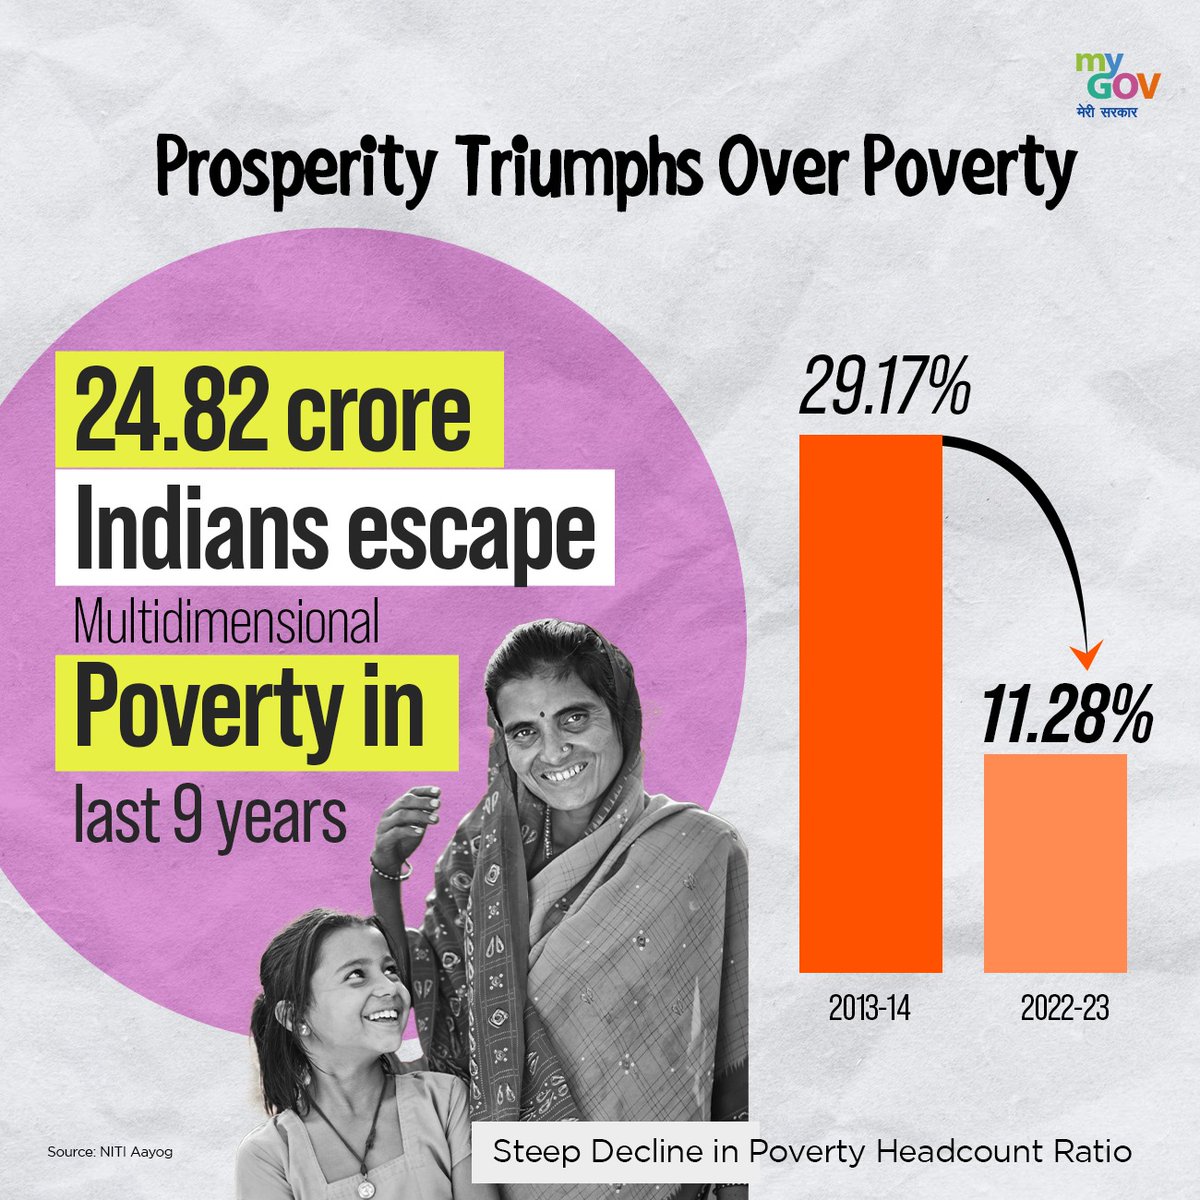 Breaking the Chains of Poverty!

In the past 9 years, 24.82 Crore Indians have liberated themselves from Multidimensional Poverty, marking a remarkable decline in the Poverty Headcount Ratio.

#PovertyReduction
#NewIndia
#PovertyFreeIndia